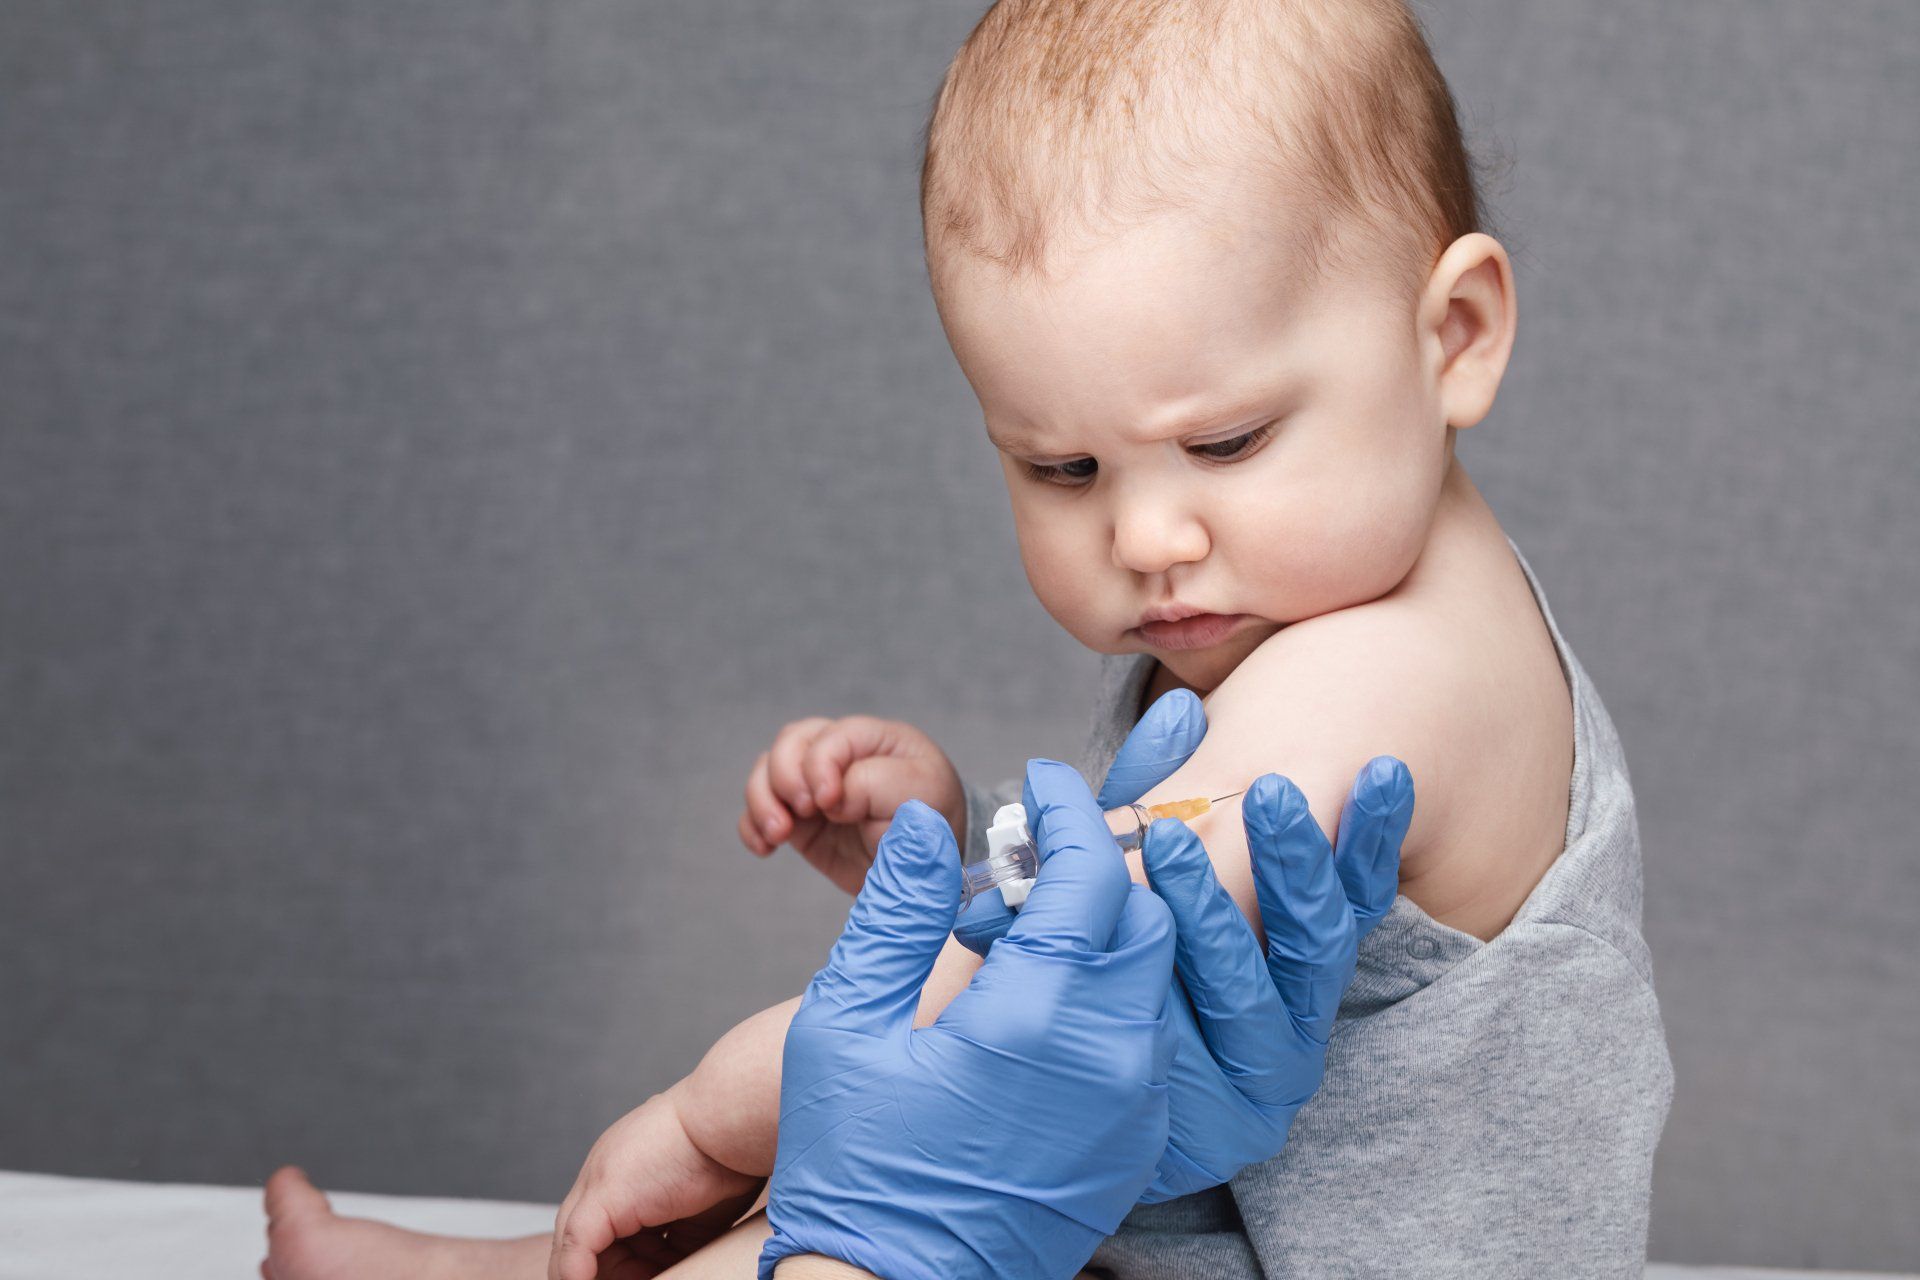 Adult hands in protective gloves injecting a baby's arm